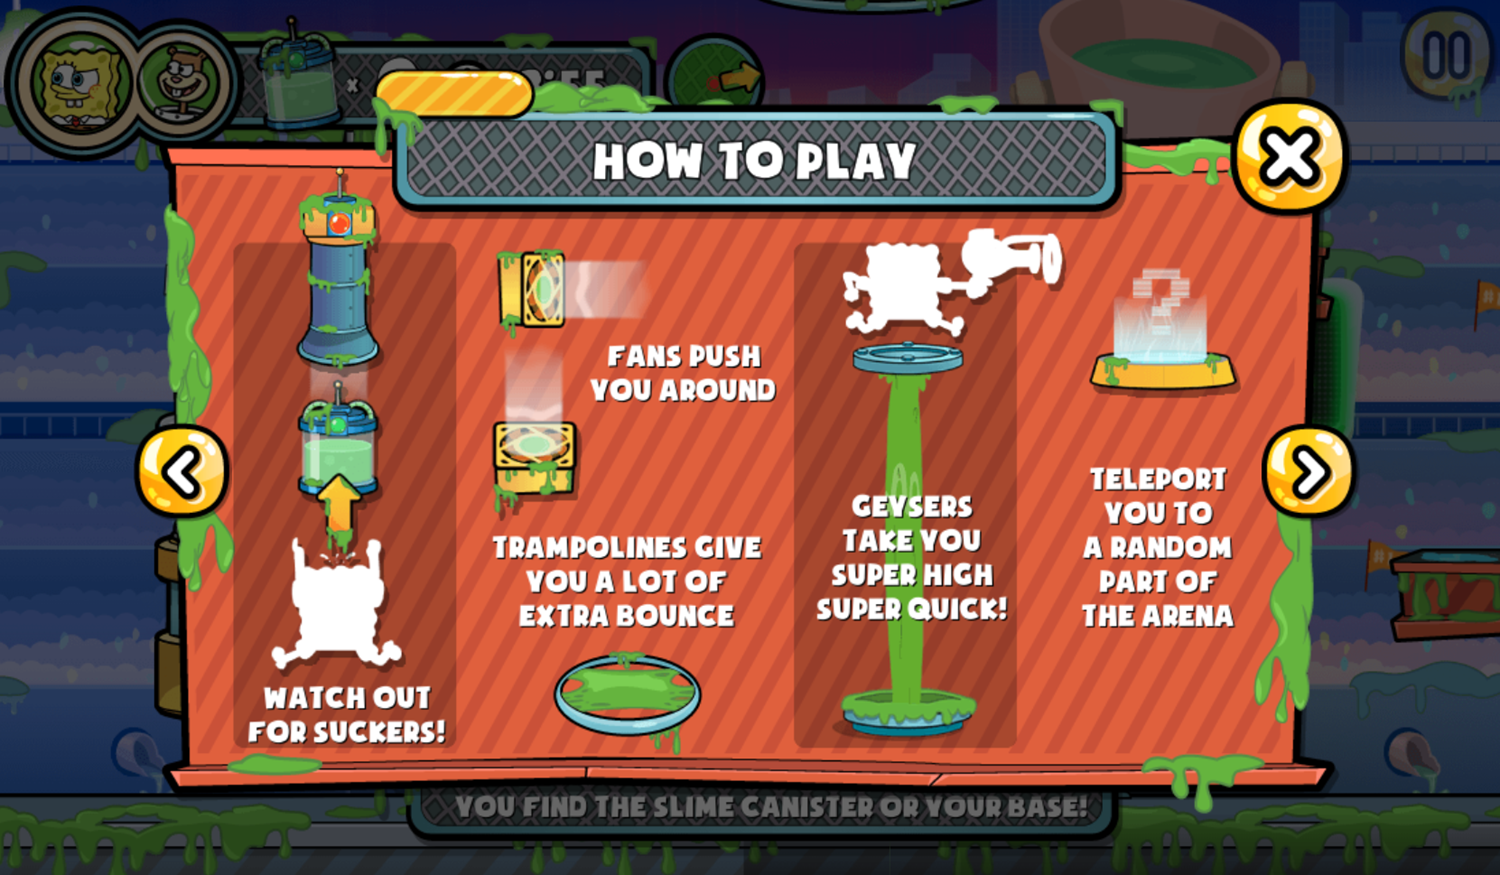 Nick Capture the Slime Game Instructions Screenshot.